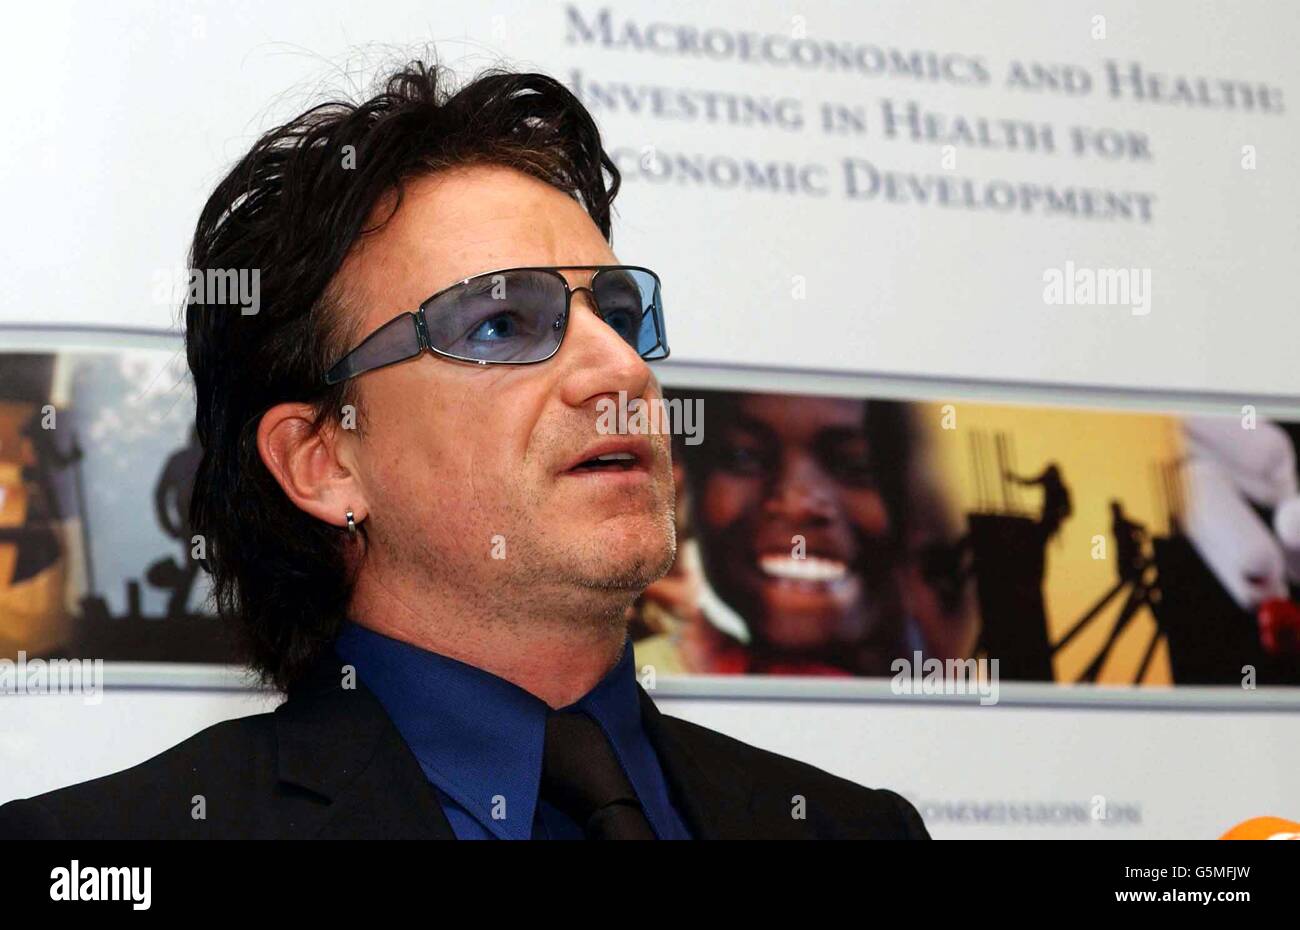 U2 frontman Bono during a photocall in London, to launch a new blueprint for global health policy, which calls for greater medical investment to help the world's poor. Stock Photo